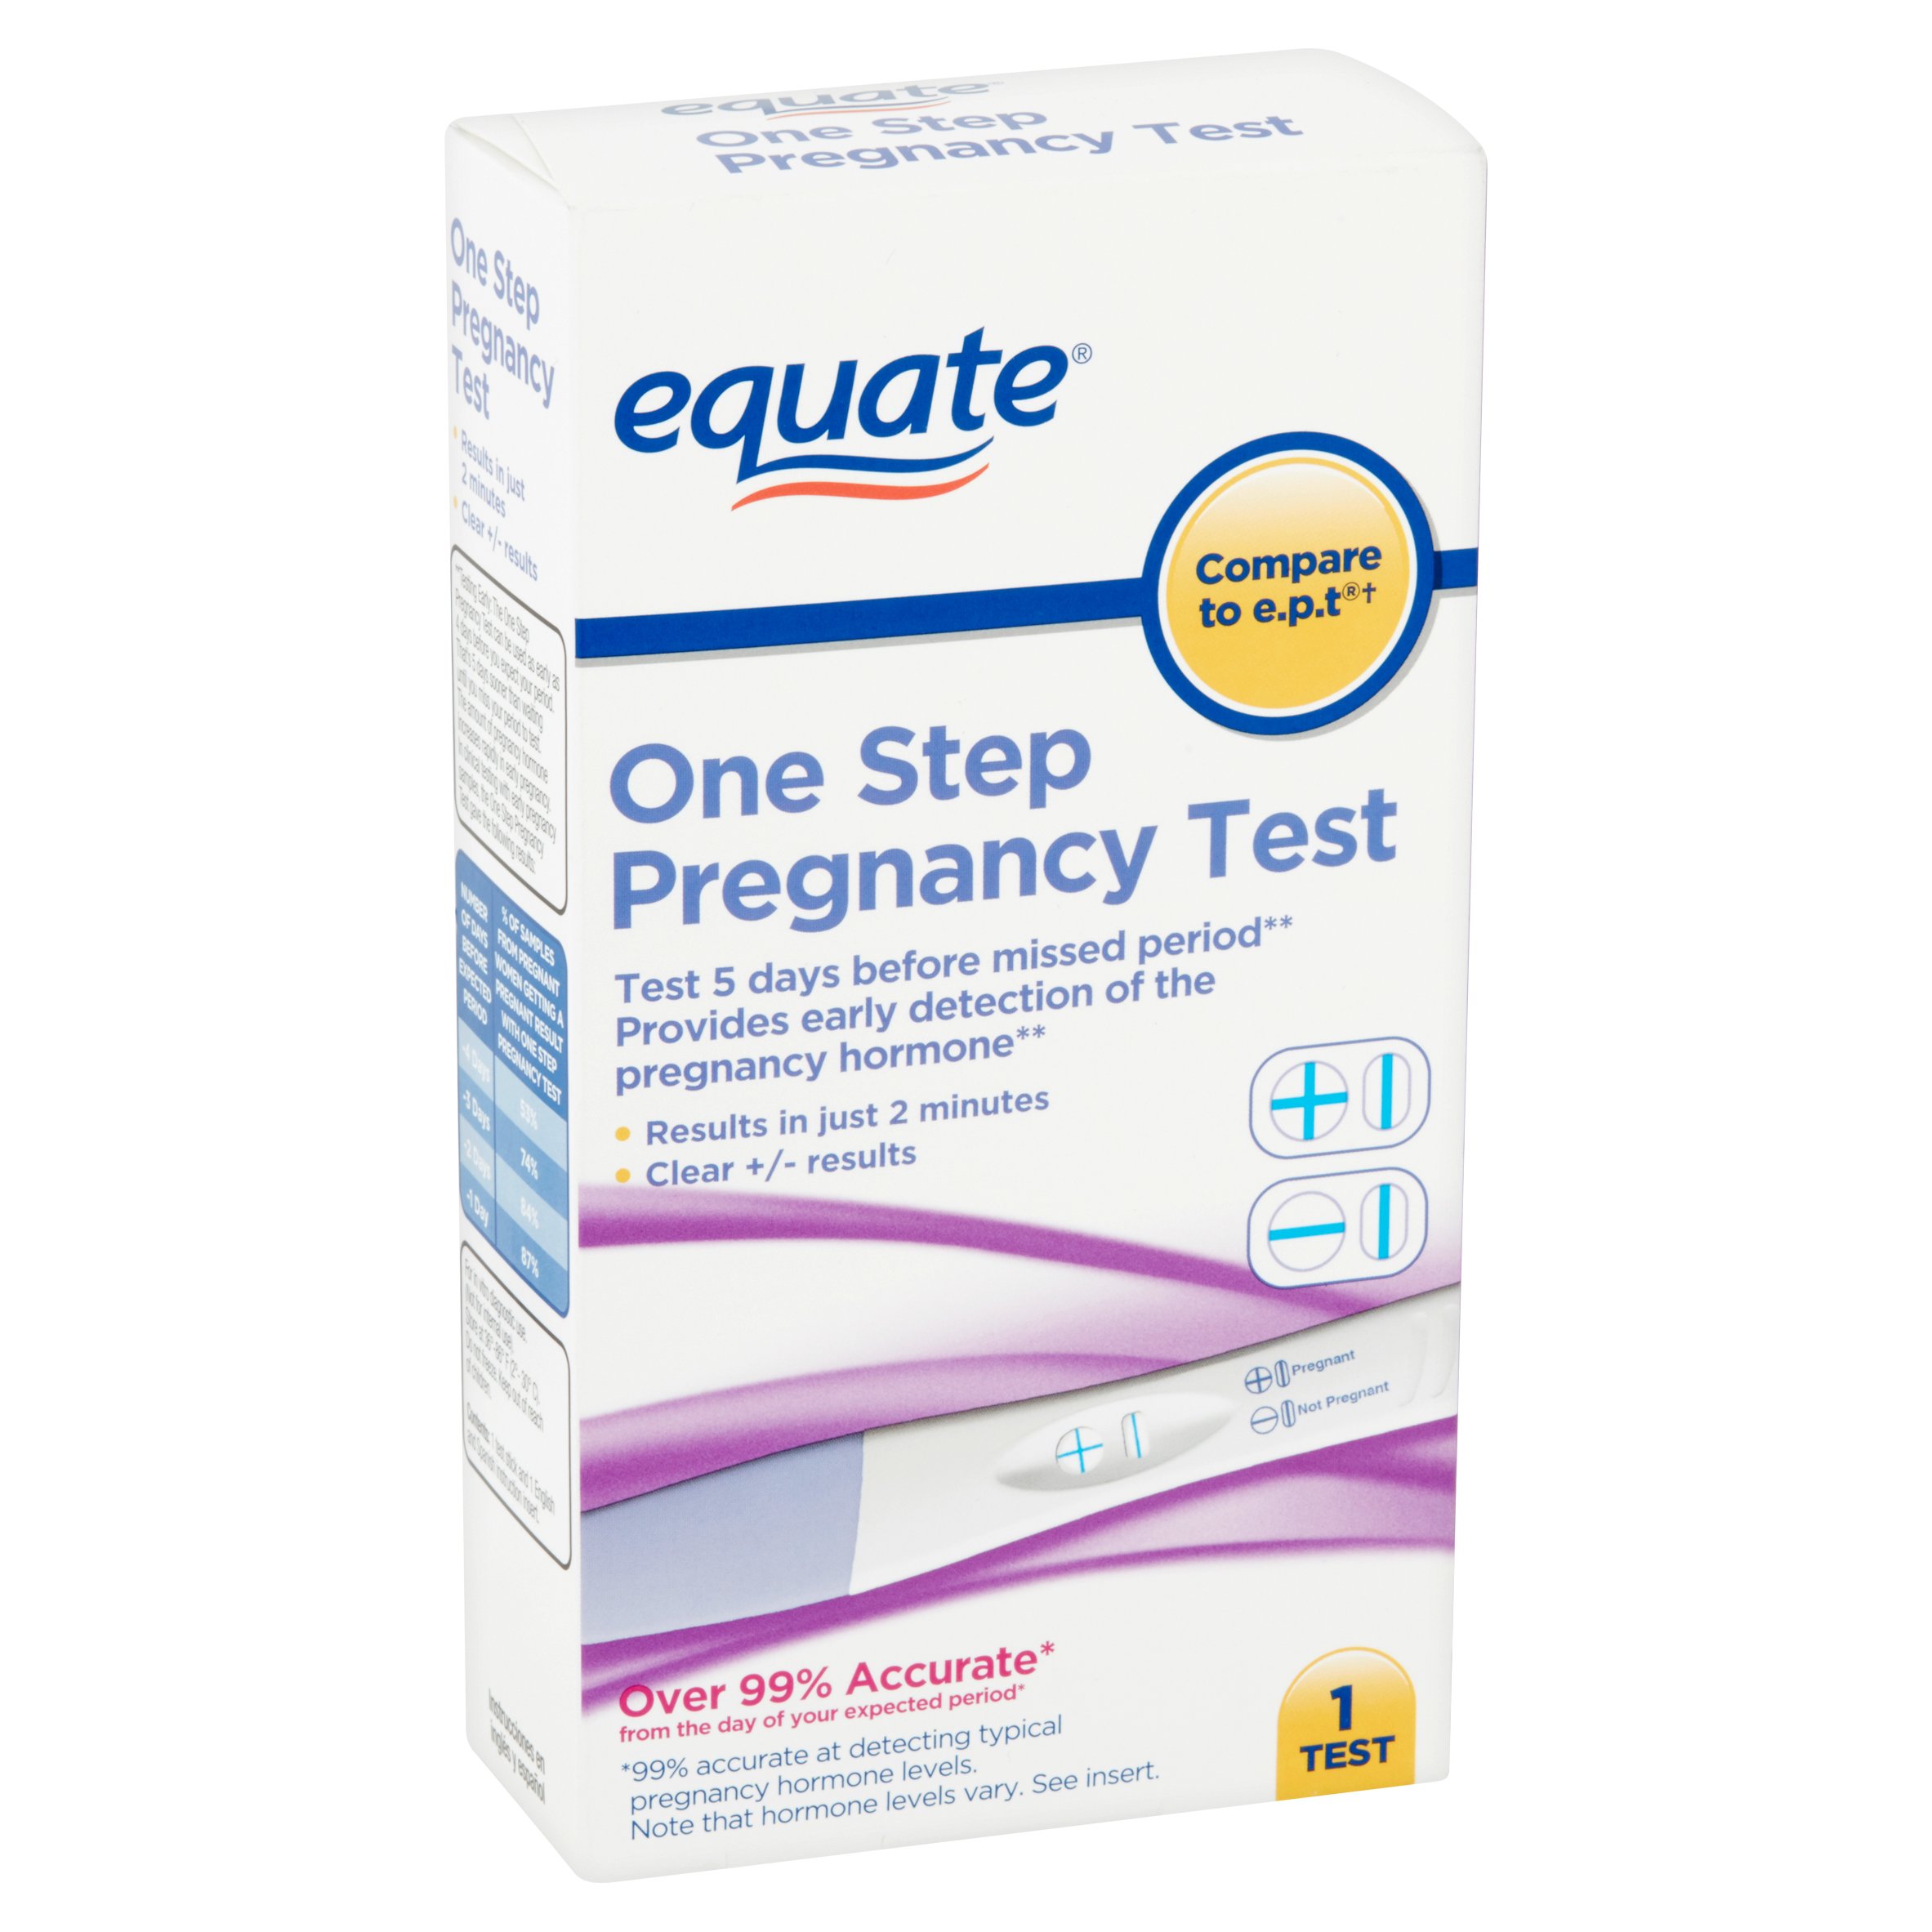 Equate One Step Pregnancy Test - image 2 of 5